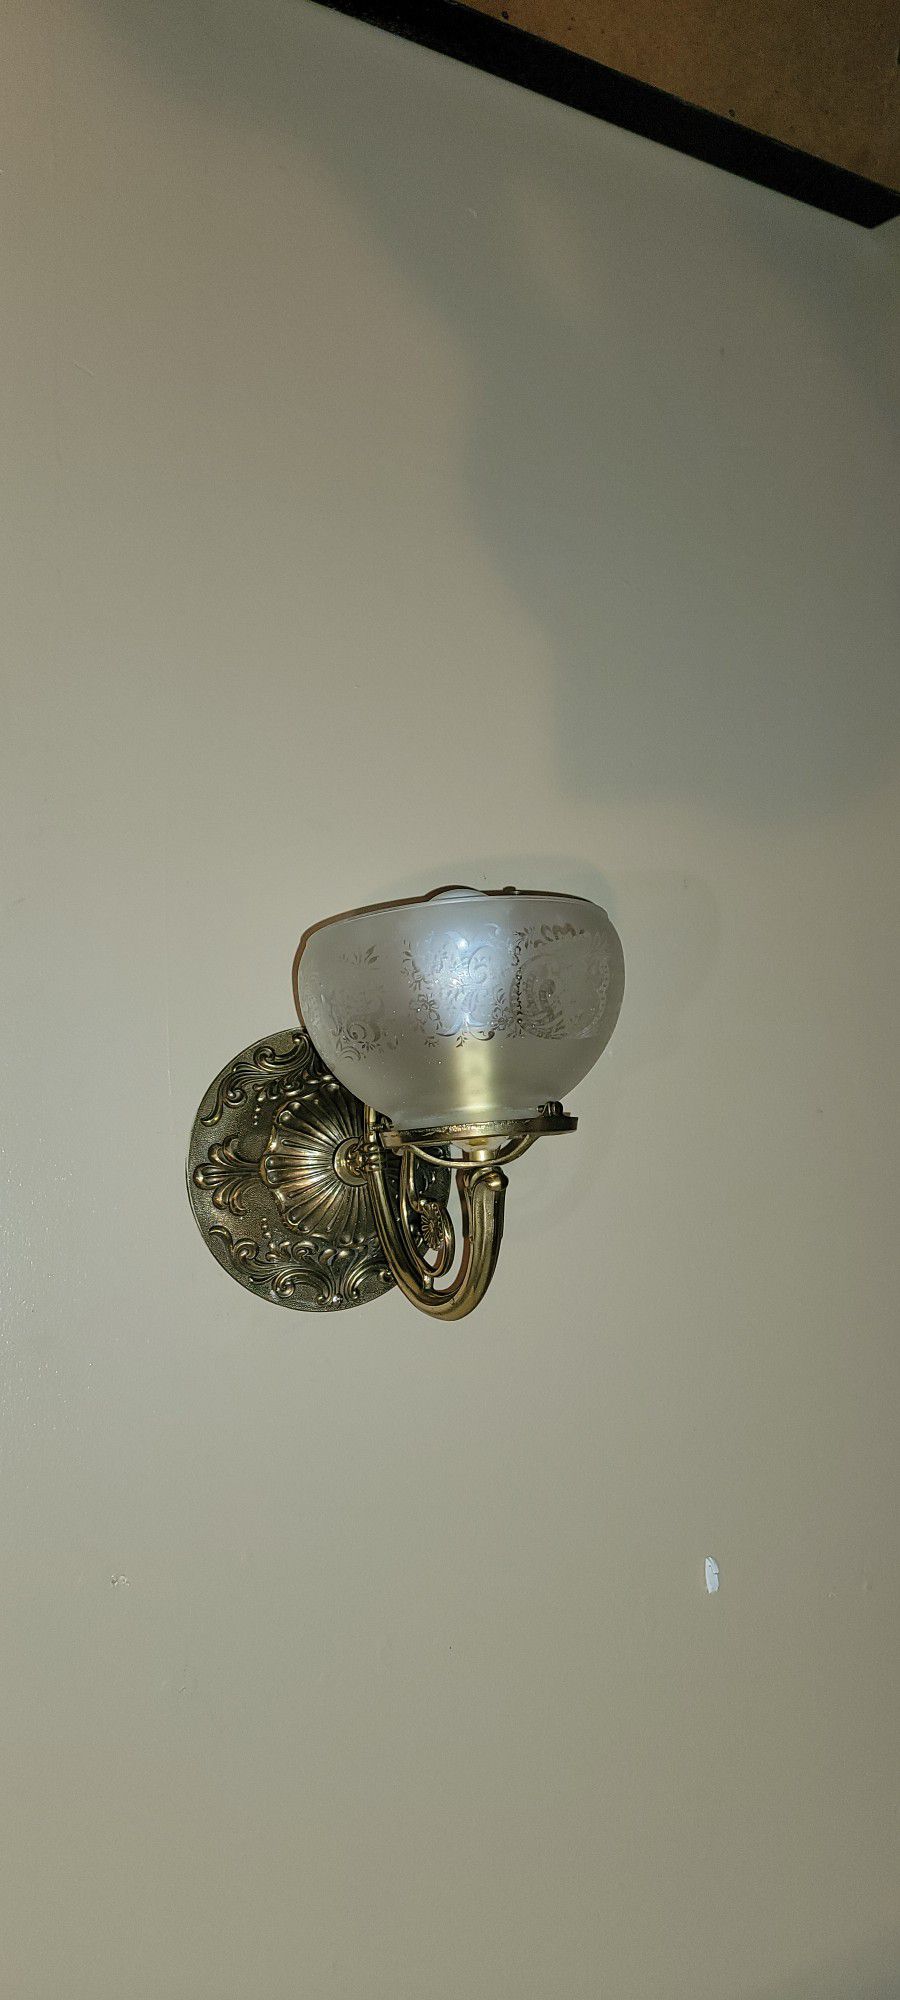 Beautiful Mid-Century Brass Wall Lamp With Etched Glass Shades 13x9 "